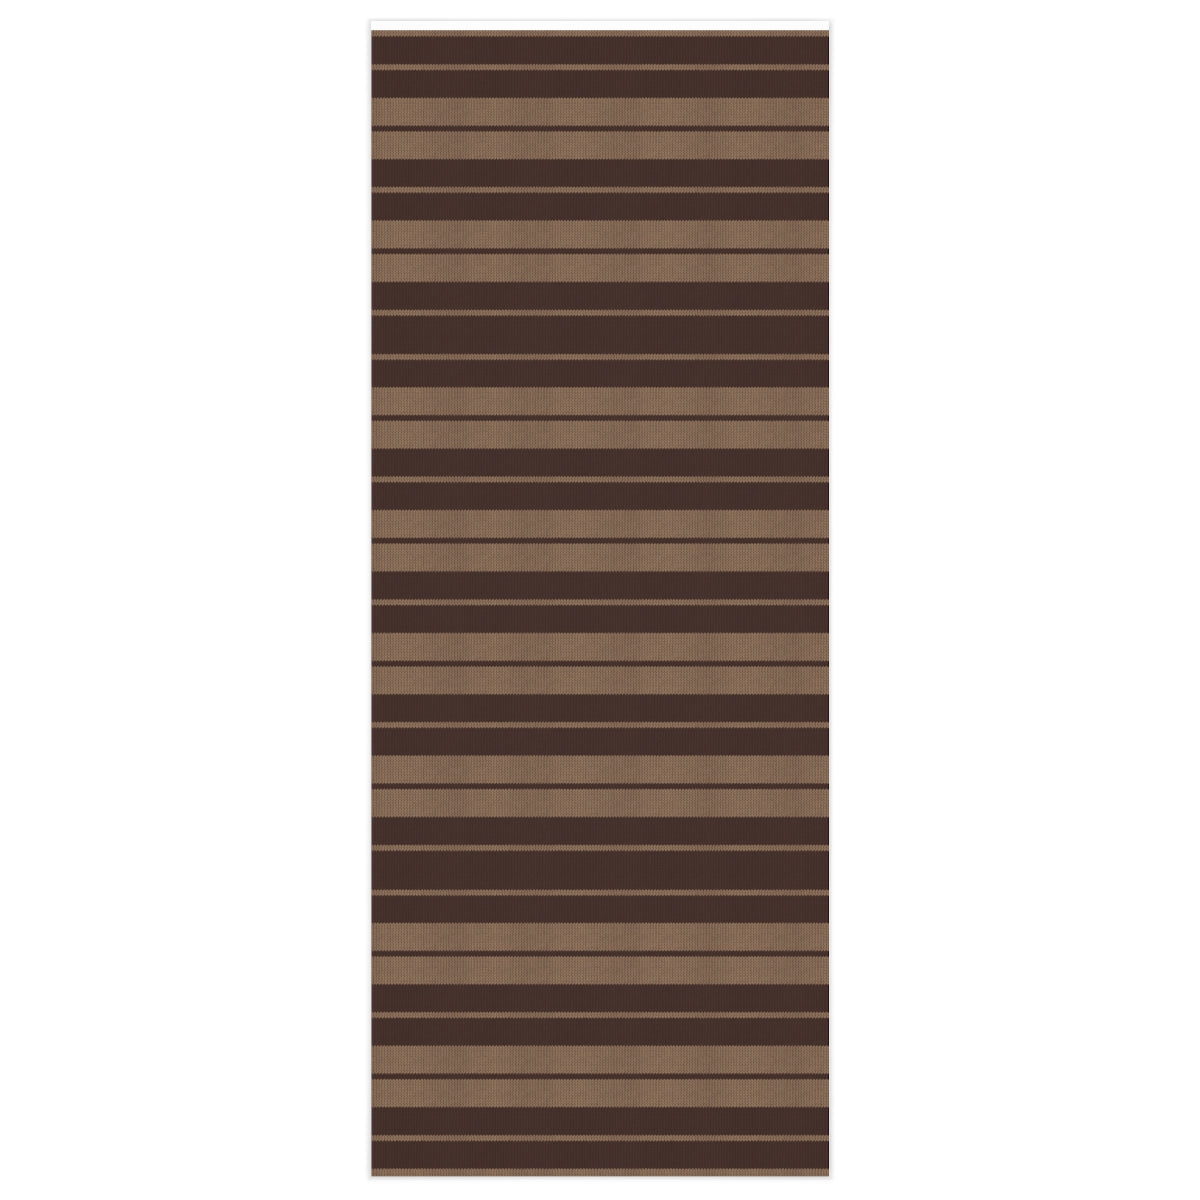 OG Charlie Brown Stripe (Brown & Tan) - Wrapping Paper